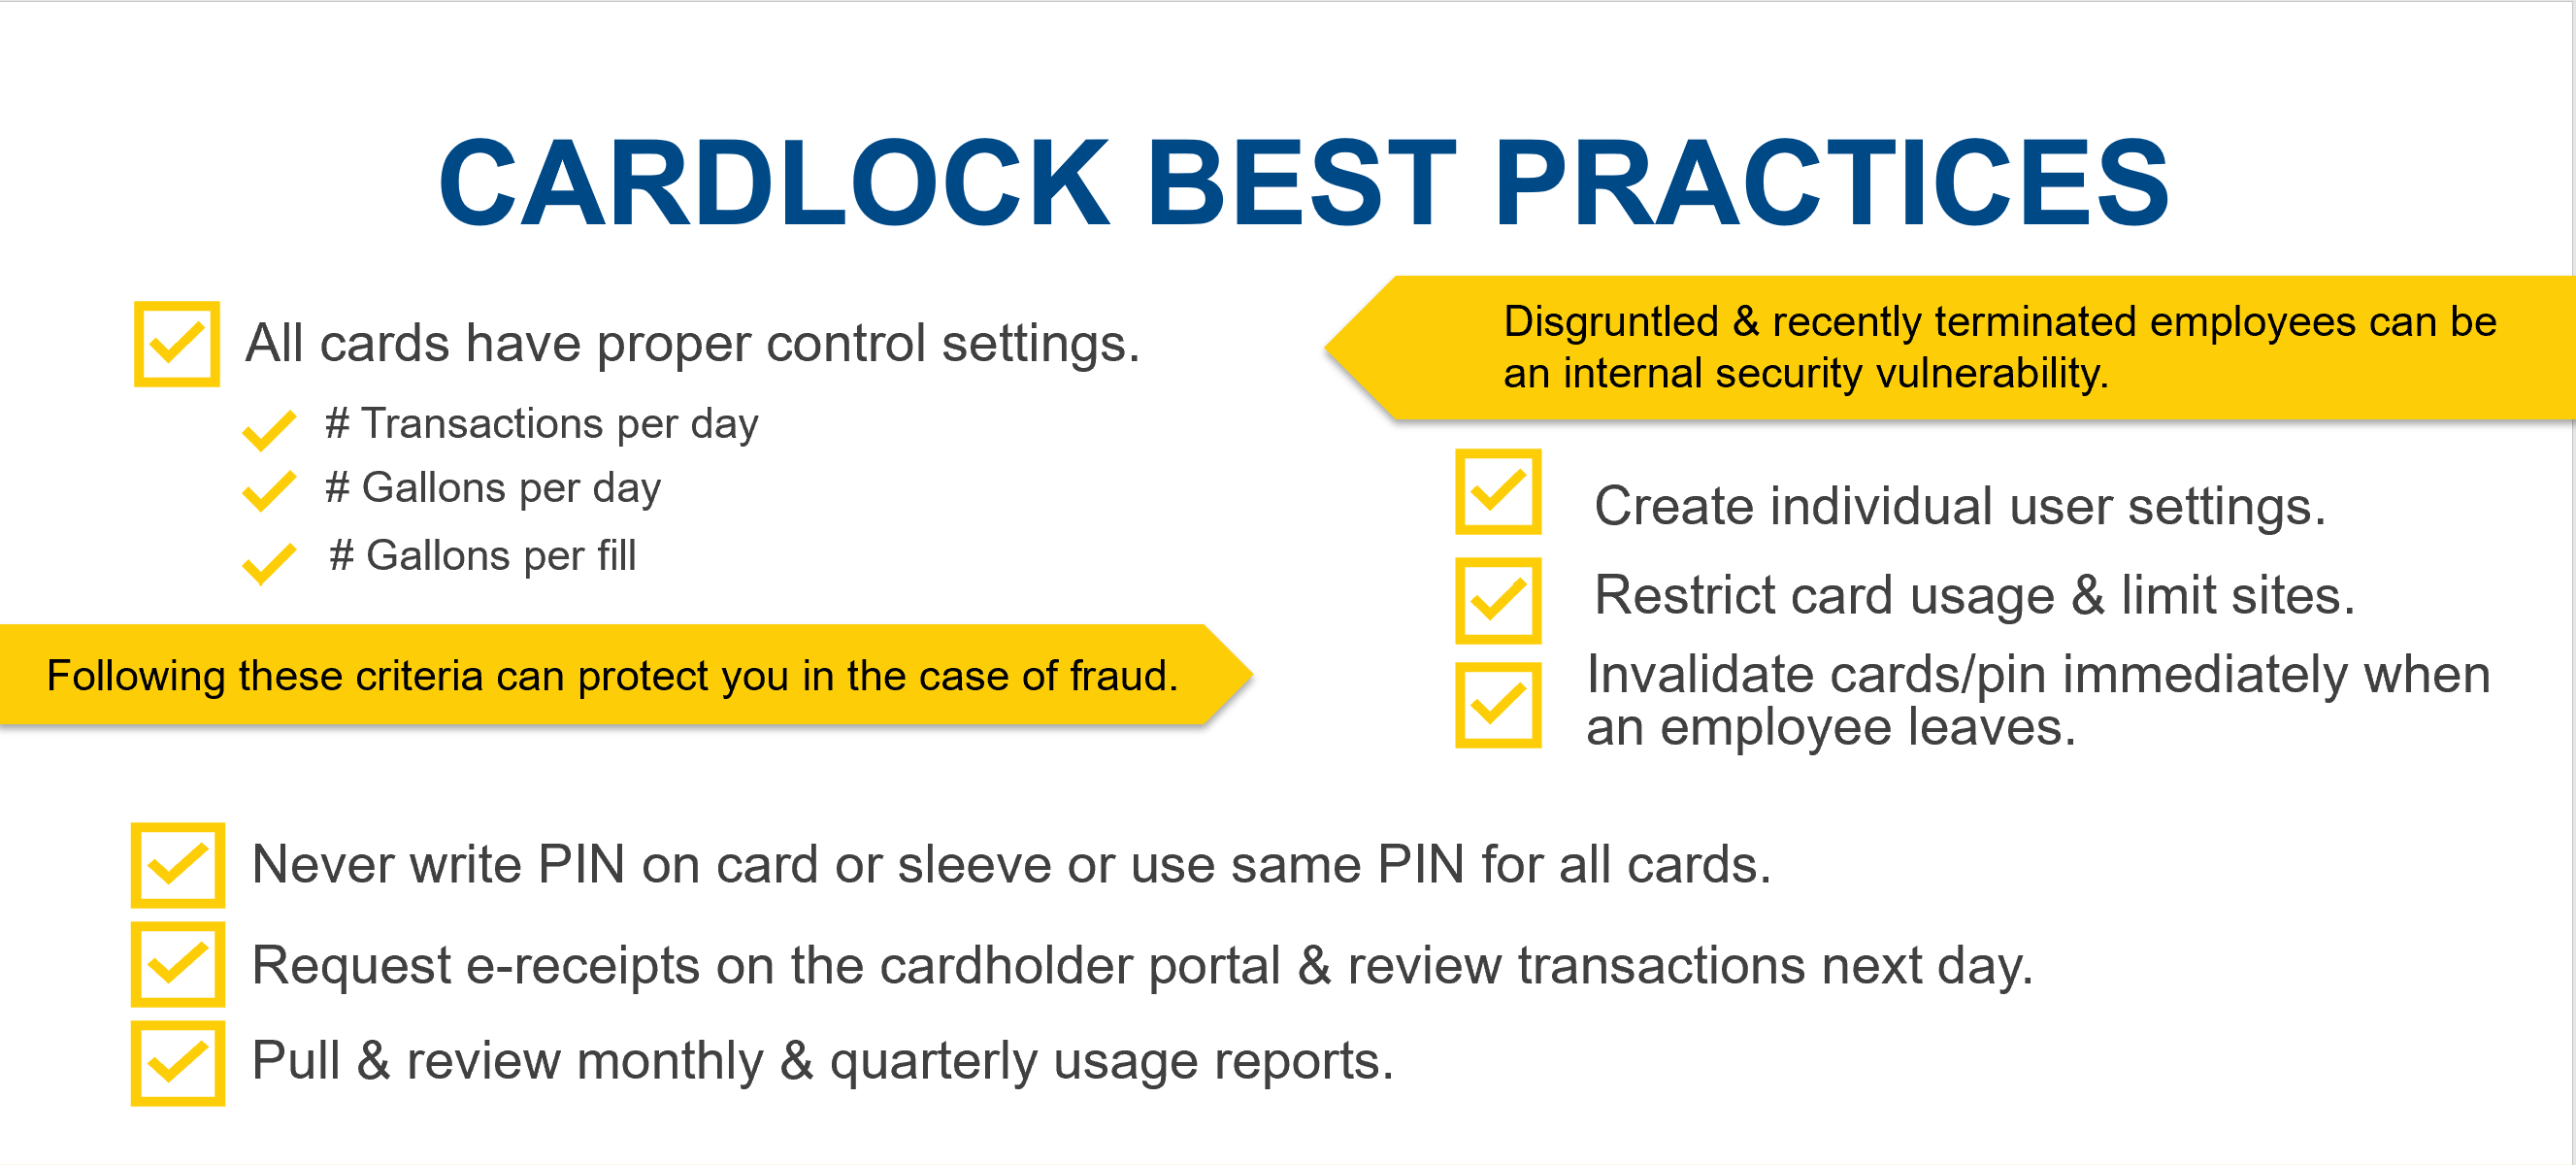 A checklist of cardlock best practices